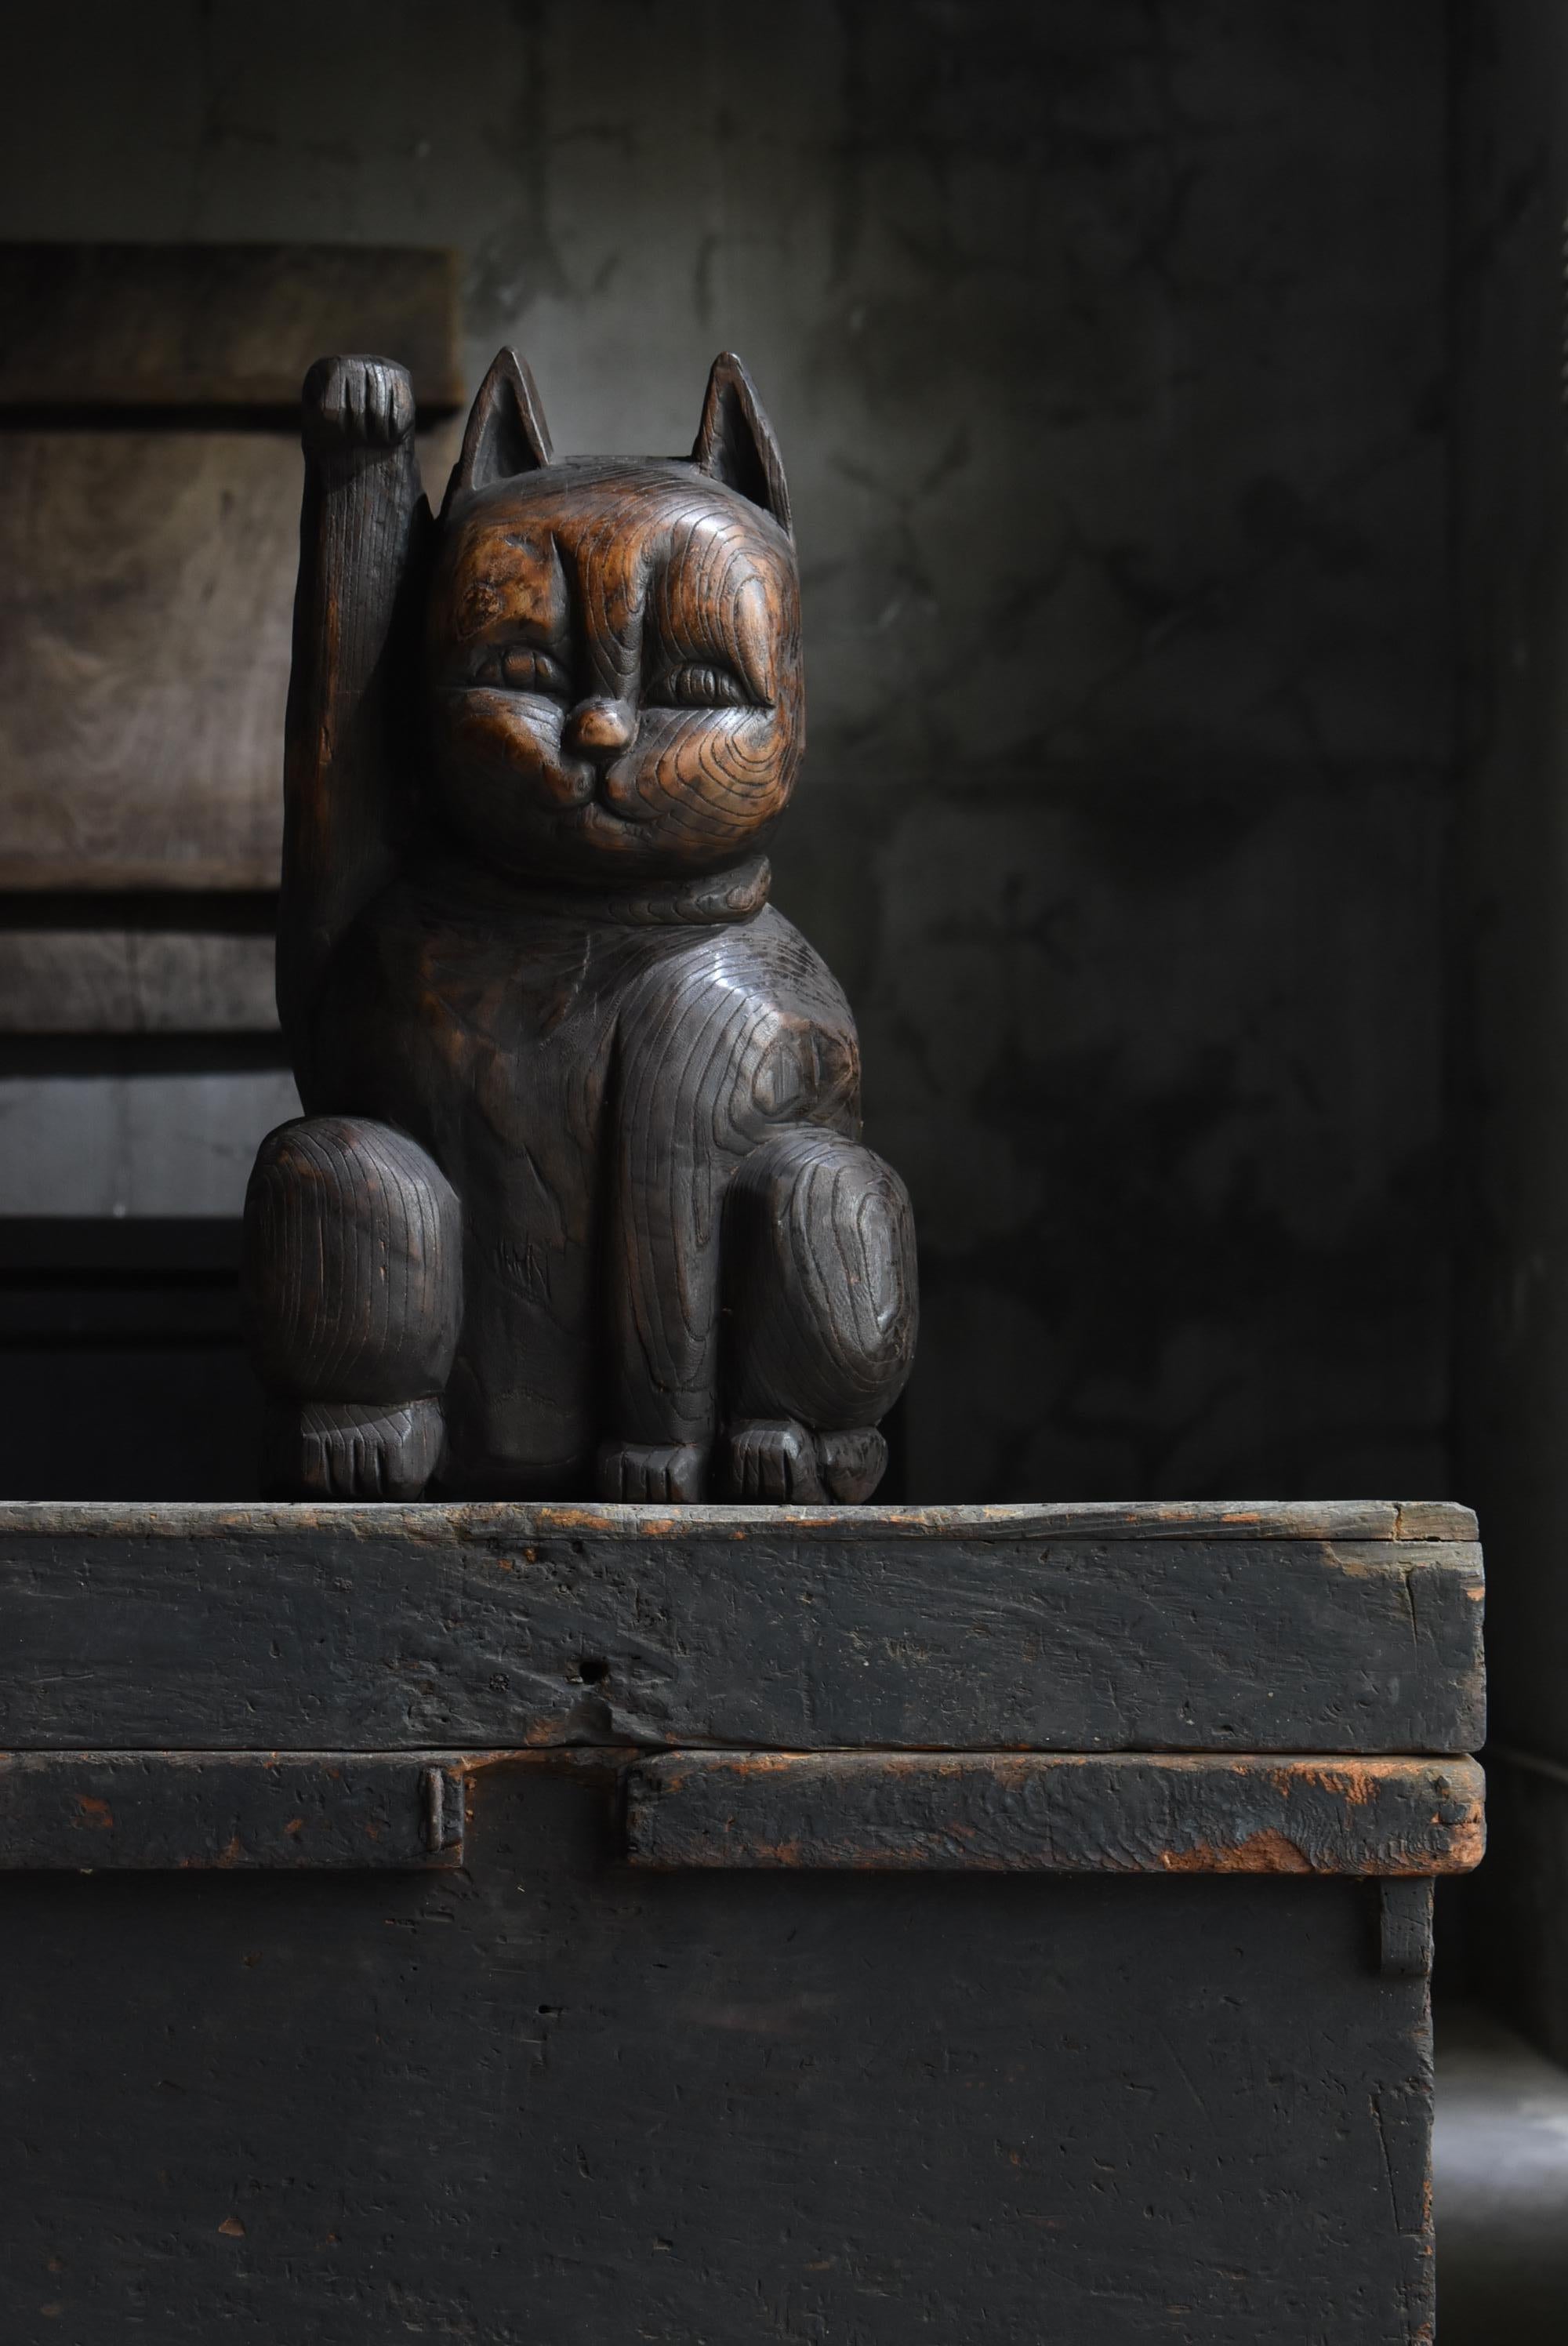 This is an old Japanese beckoning cat wood carving.
It is estimated to be a wood carving from the early Showa period (1900s-1940s).
The material is zelkova.

It has been popular in Japan for a long time as a lucky charm for 